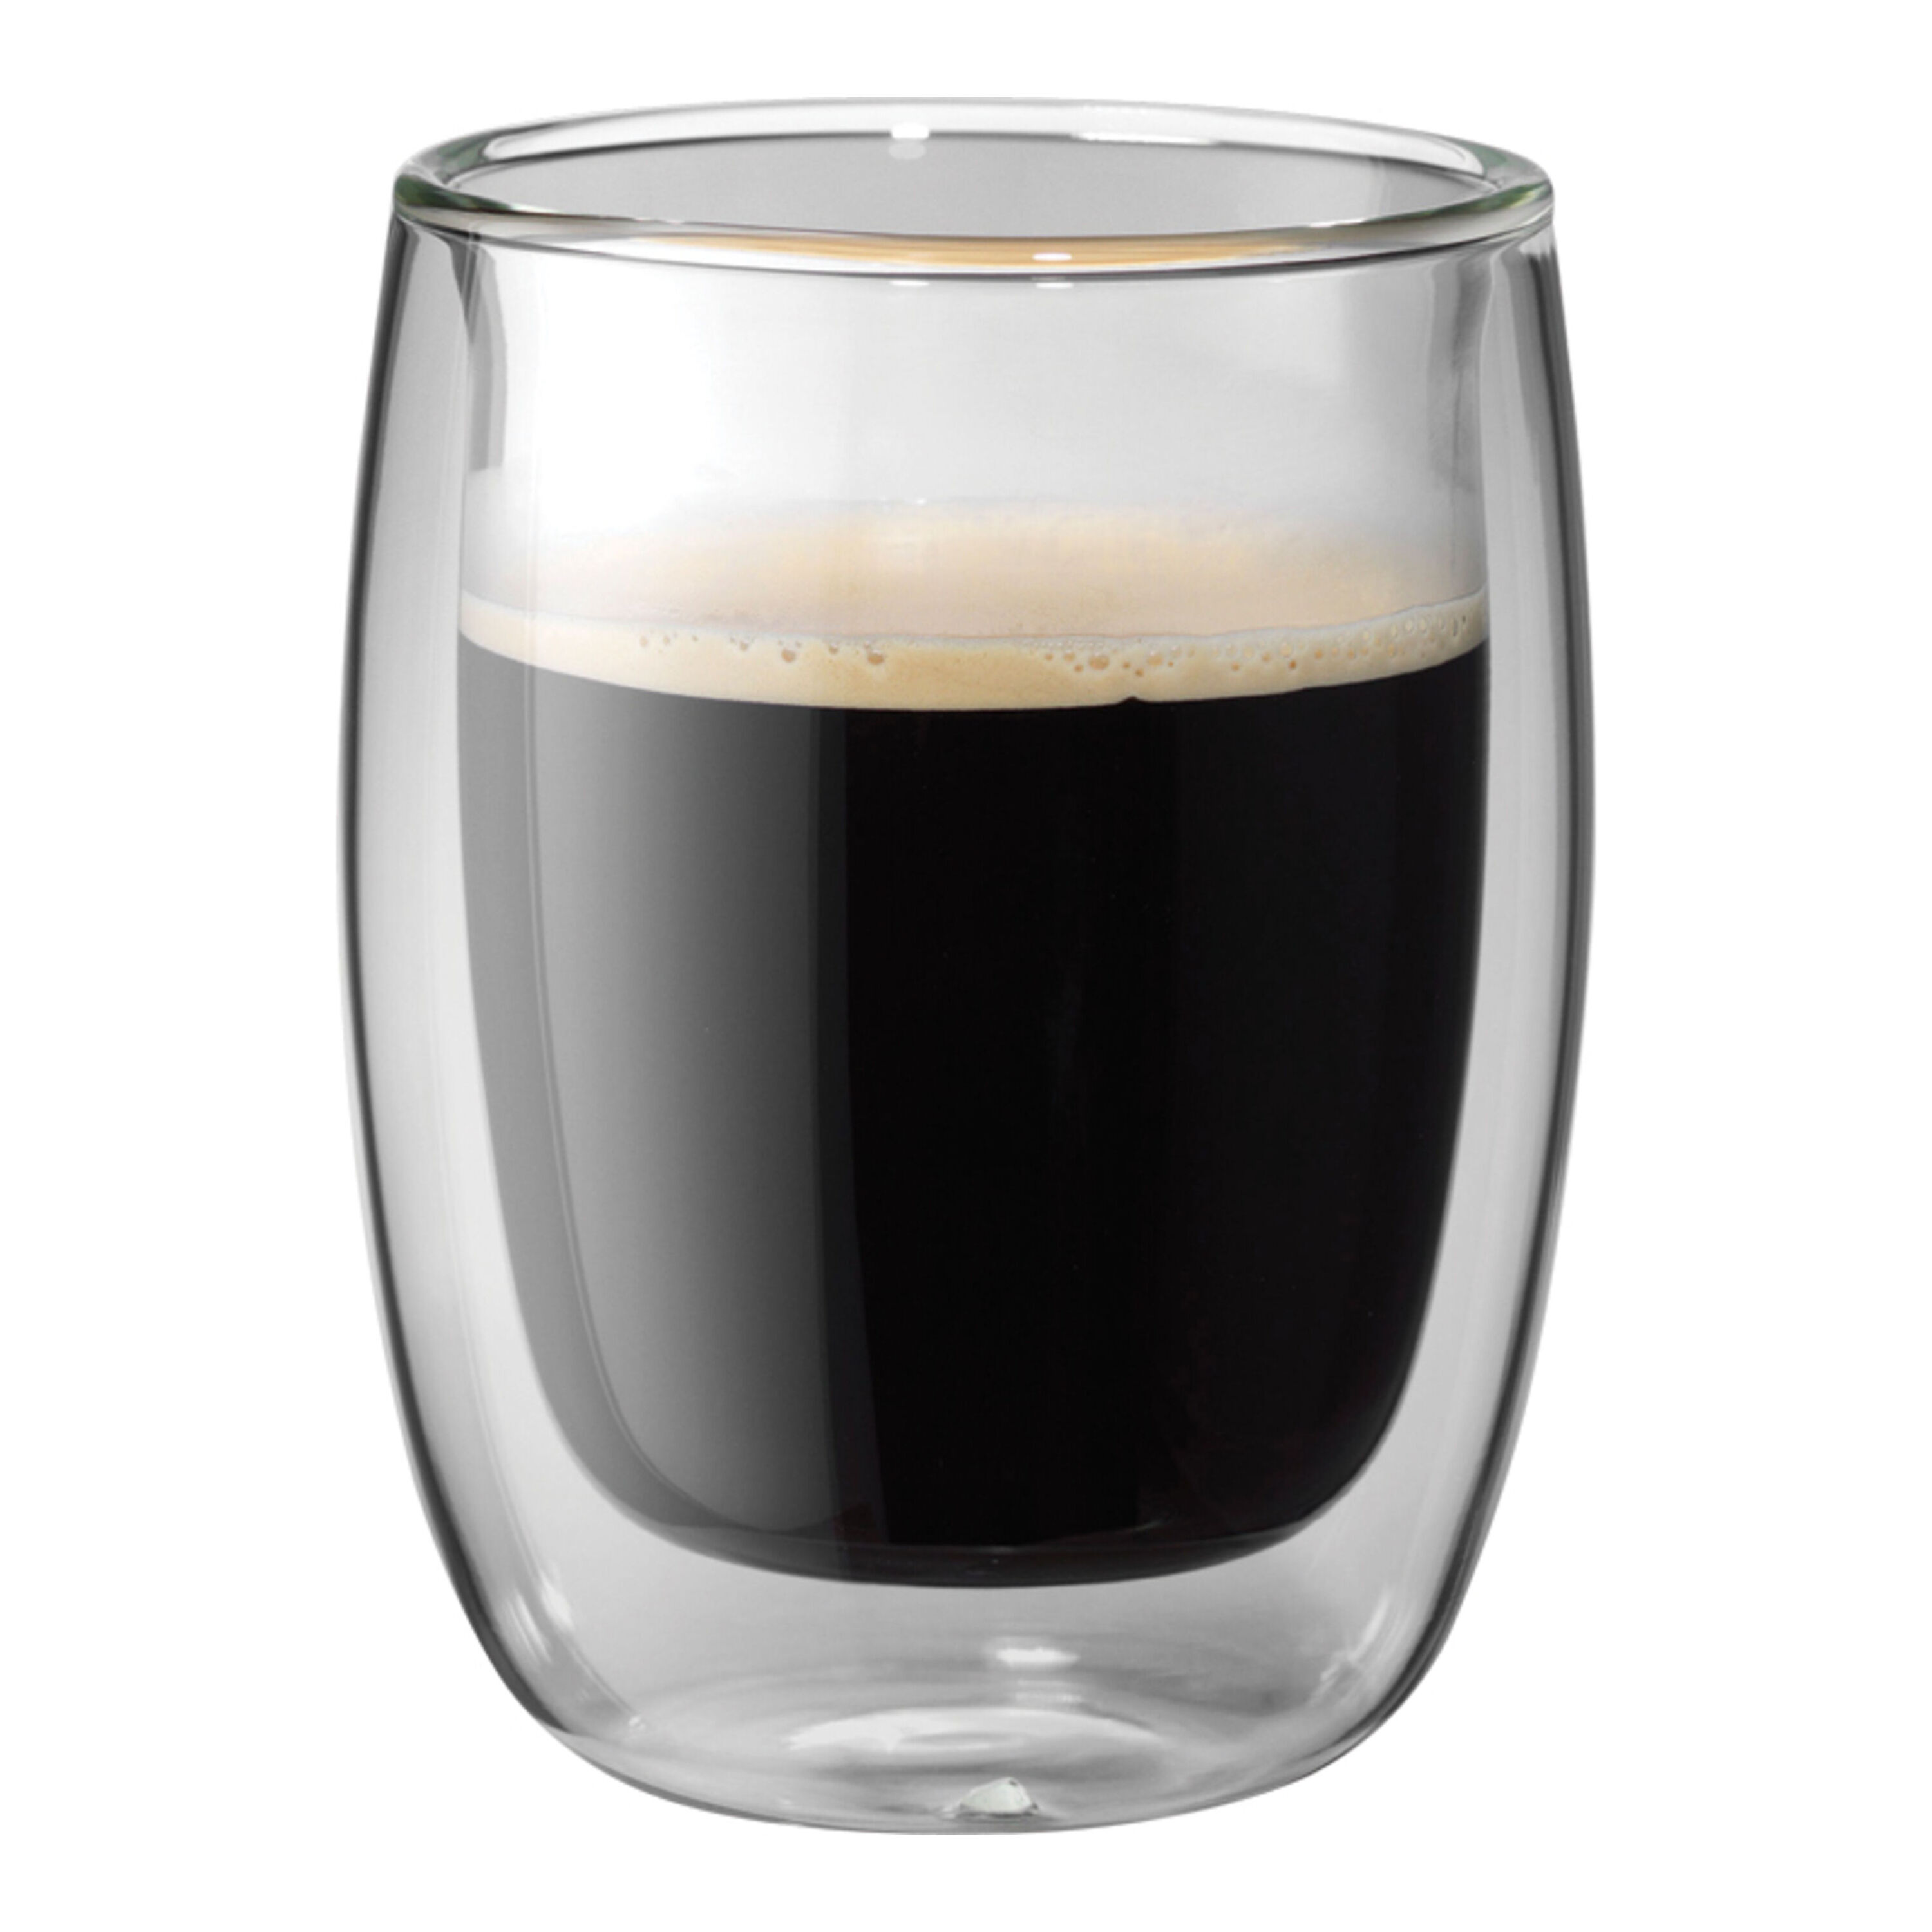 Espresso Cups, Glass Cups Shot Glass Coffee Espresso Cups  Cafecito Cups Double Wall Thermo Insulated Glass ,80 ML/2. 7 Ounce,Set of  4: Espresso Cups